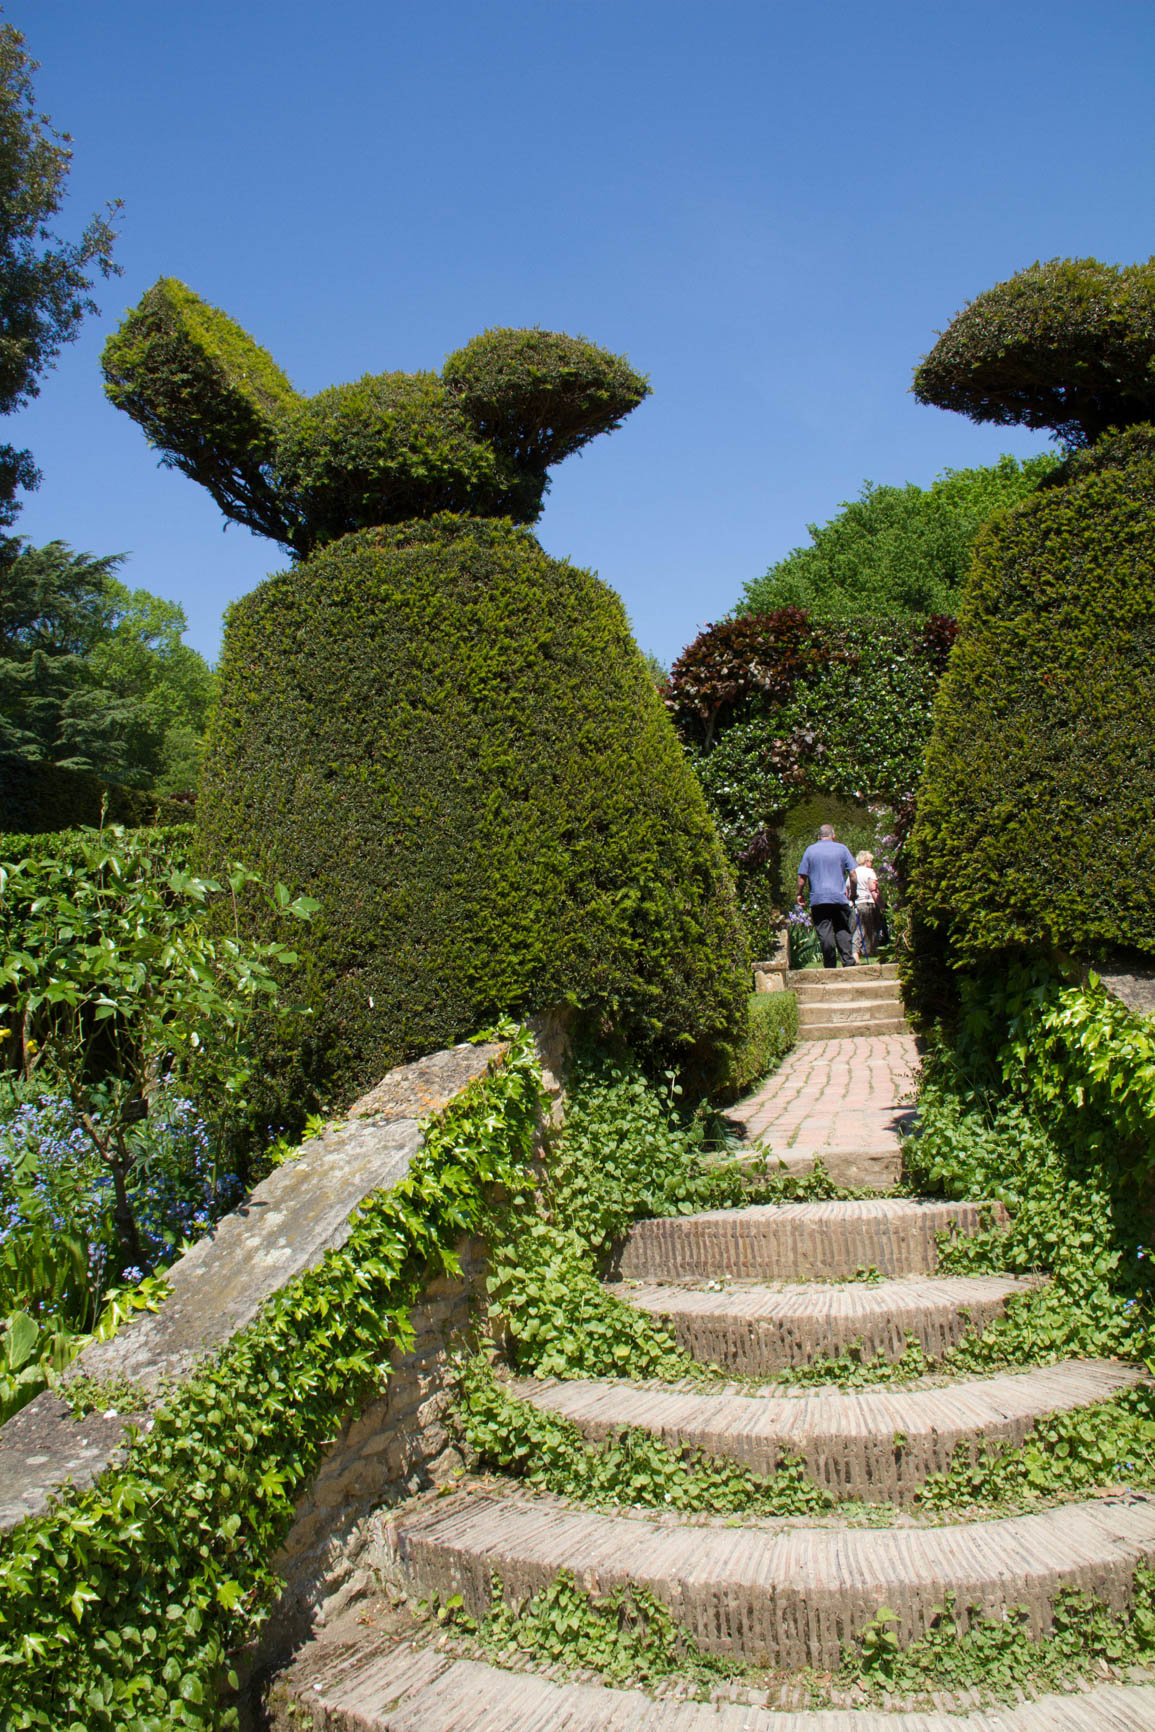 Lawrence lJohnston used topiary to great effect in his garden, Hidcote, the first garden in England to be taken over by the National Trust.